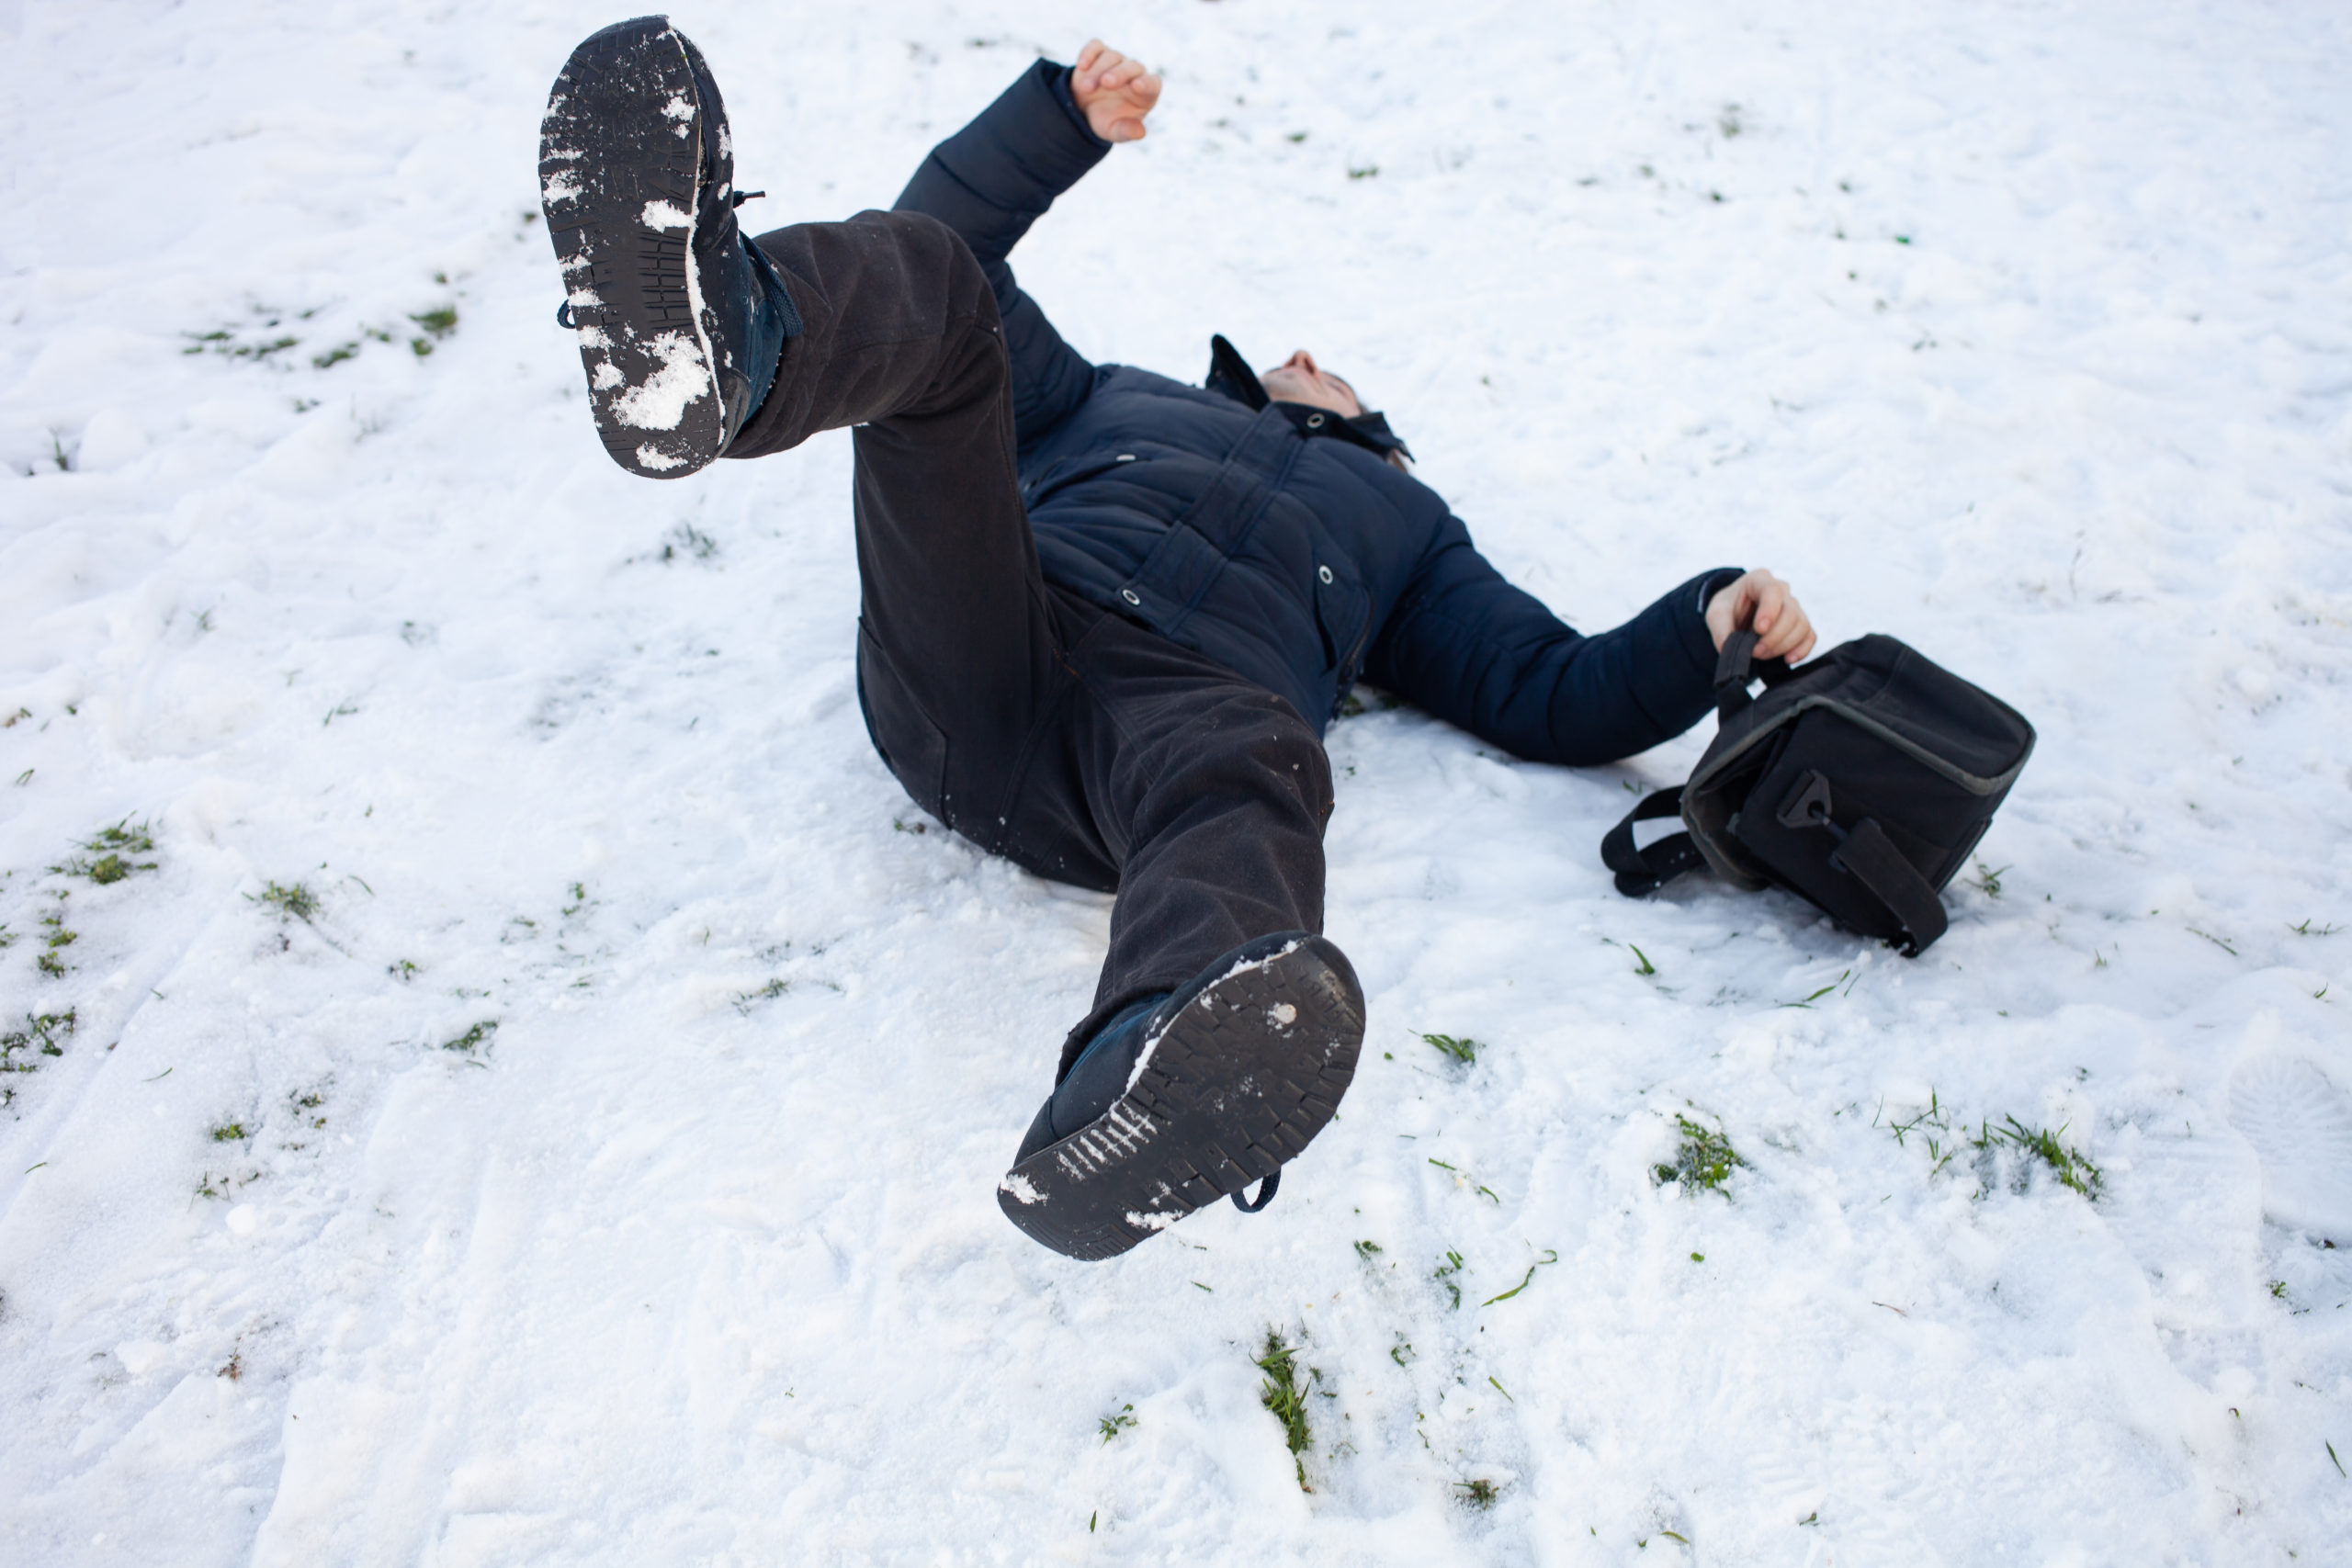 Who Is Responsible For Injuries Caused By Slips And Falls On Snow And Ice?